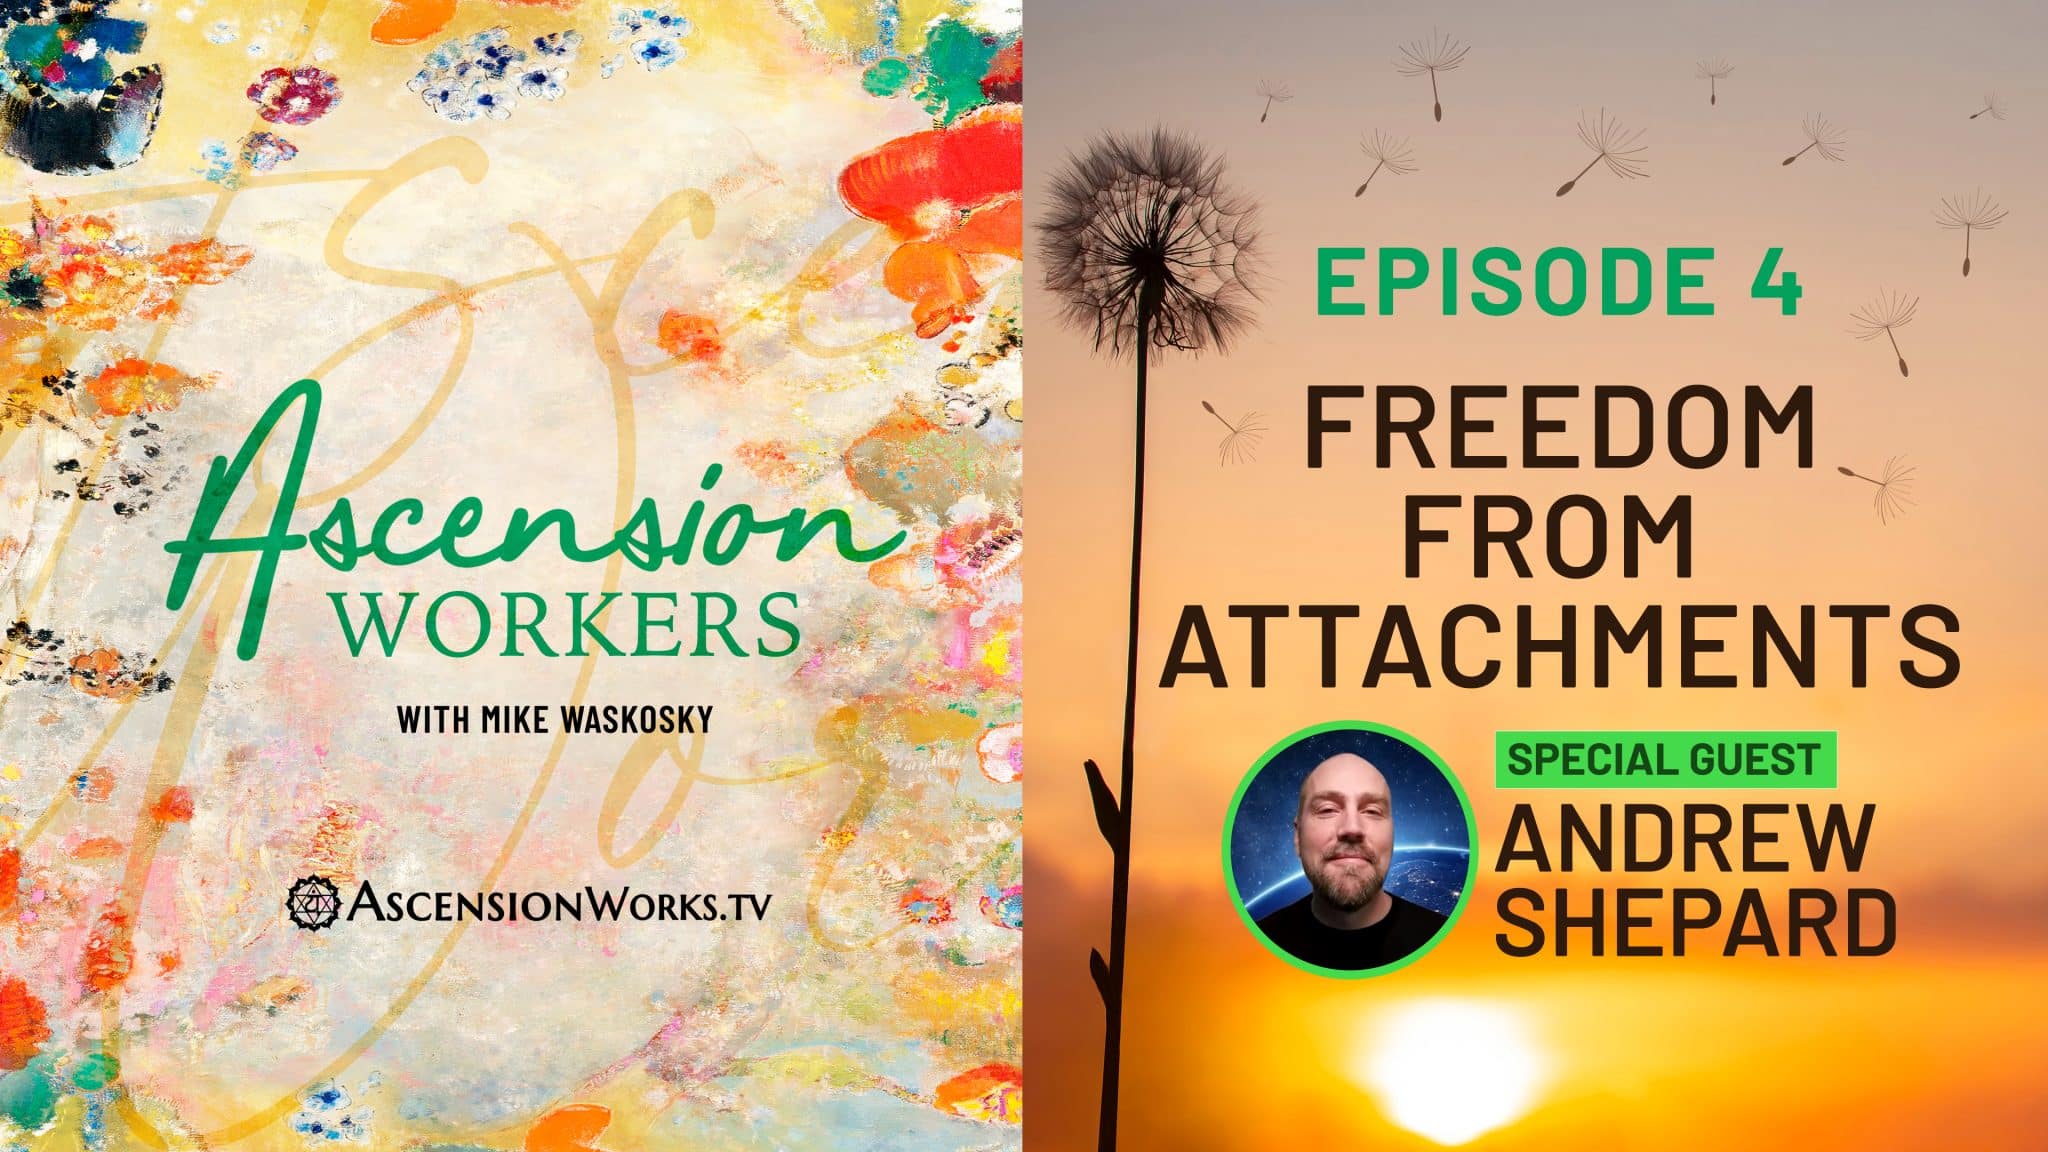 Ascension Workers Live: Episode 4 - Freedom from Attachments with Andrew Shepard & Mike Waskosky